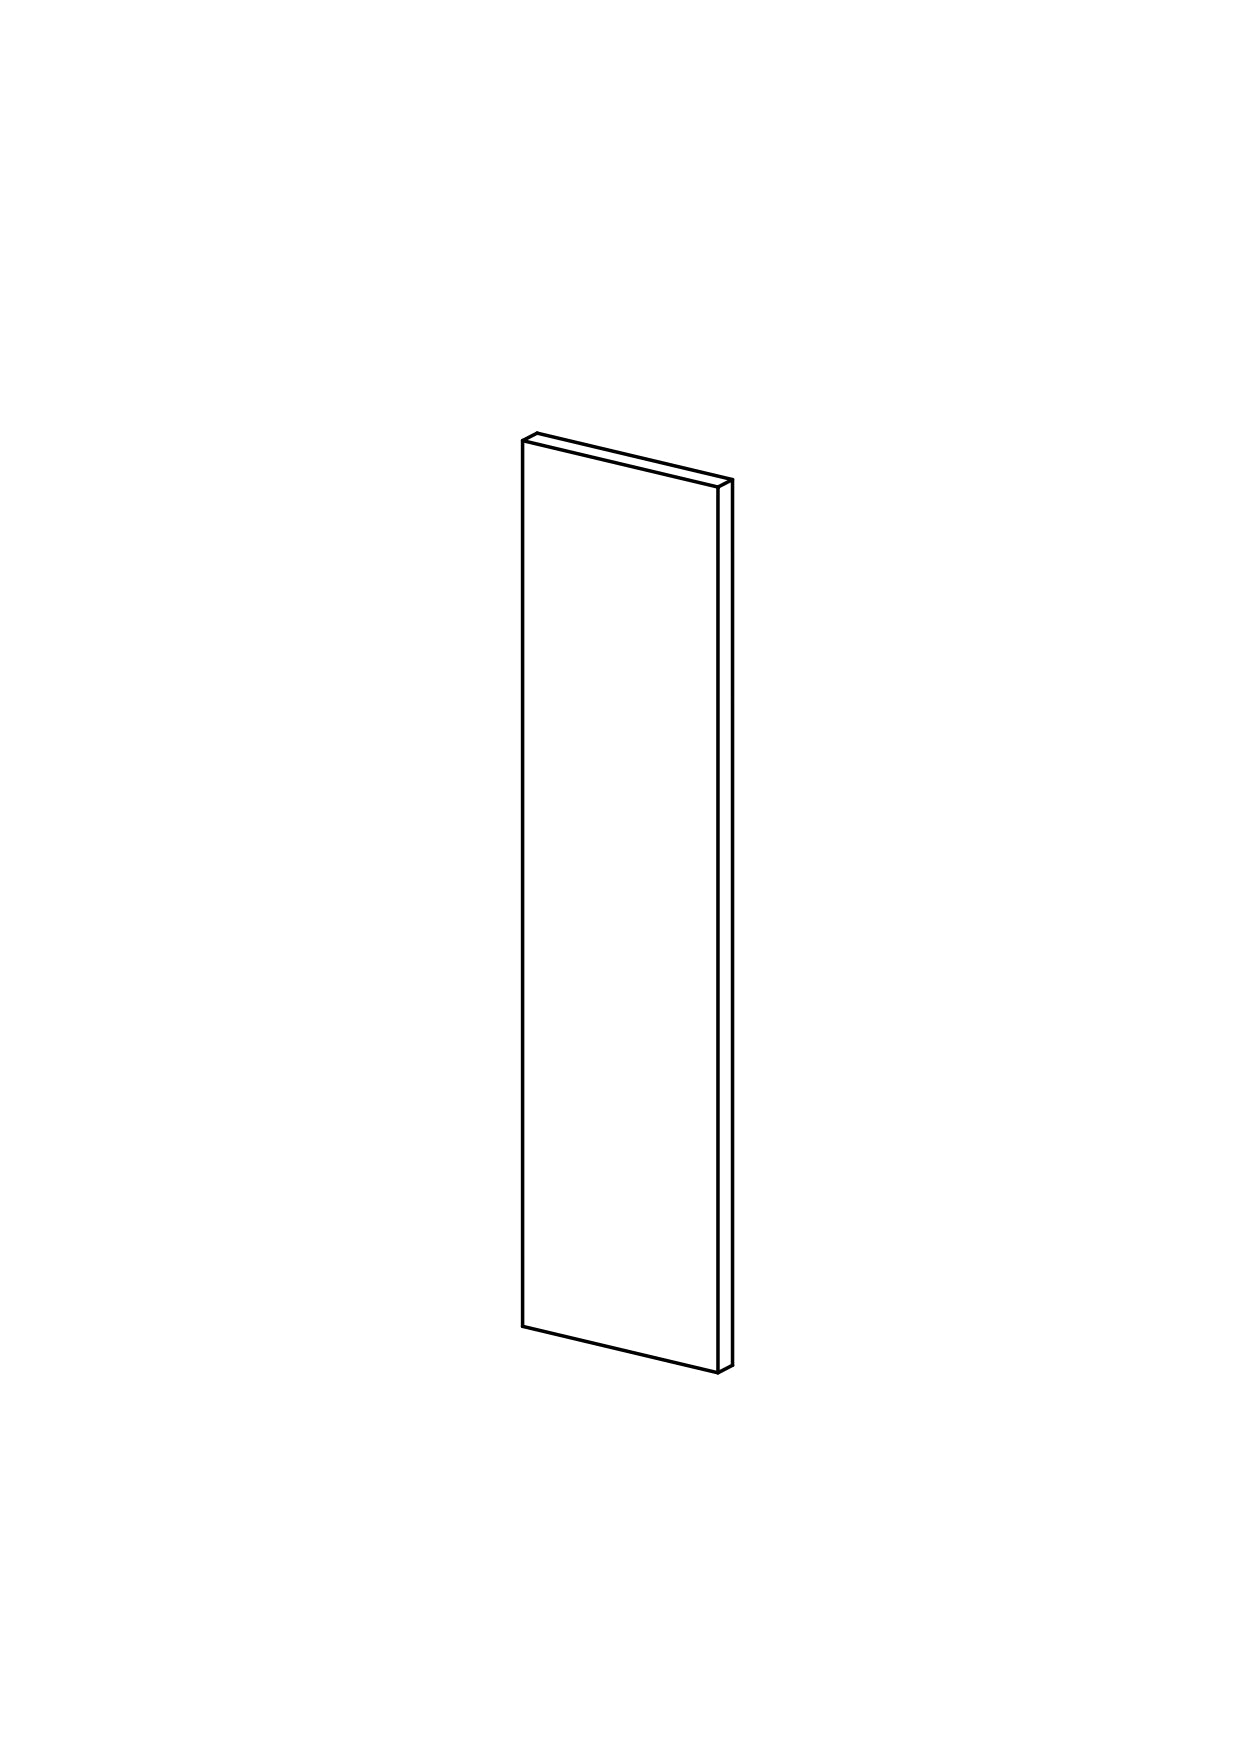 40x160 - Cover Panel - Plain - Unpainted (Raw) - METOD